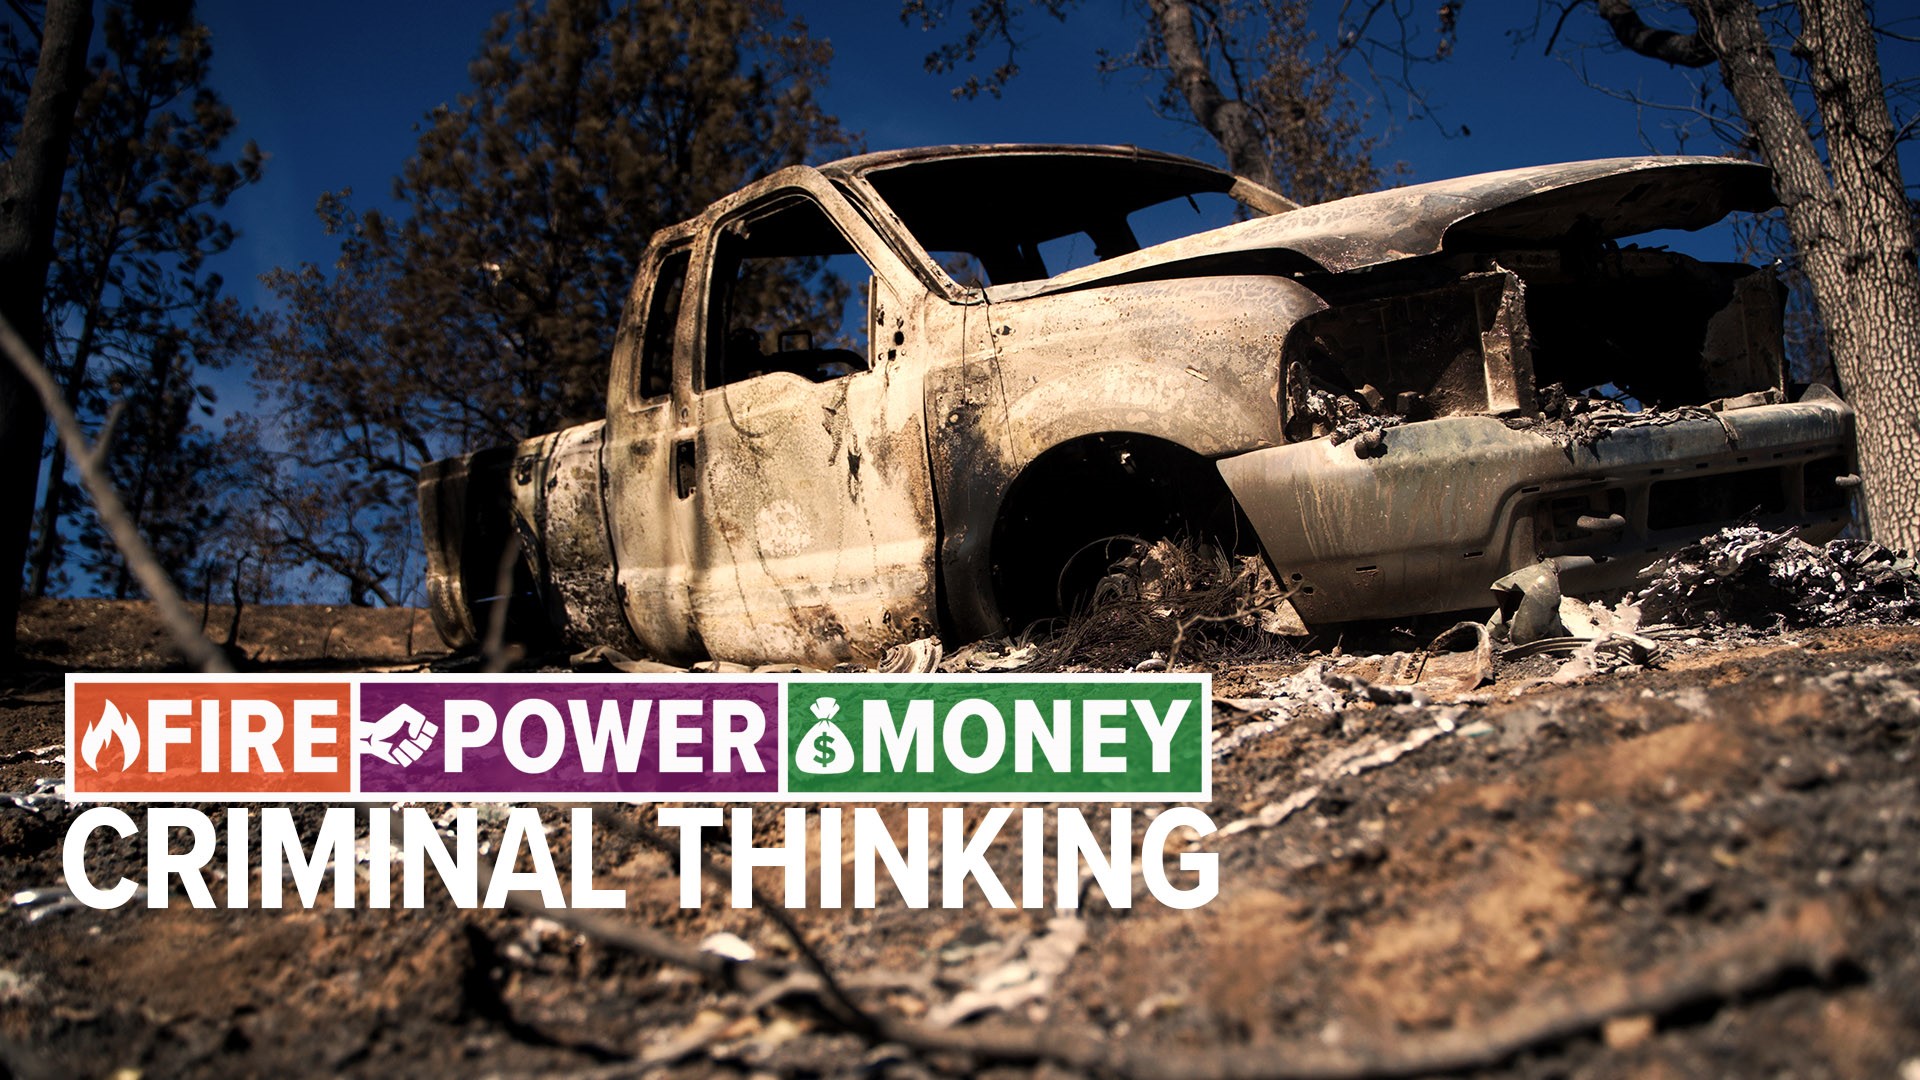 Are PG&E's power shutoffs actually keeping California safe? Why some experts are concerned by the company's 'criminal thinking.' An ABC10 Originals investigation.